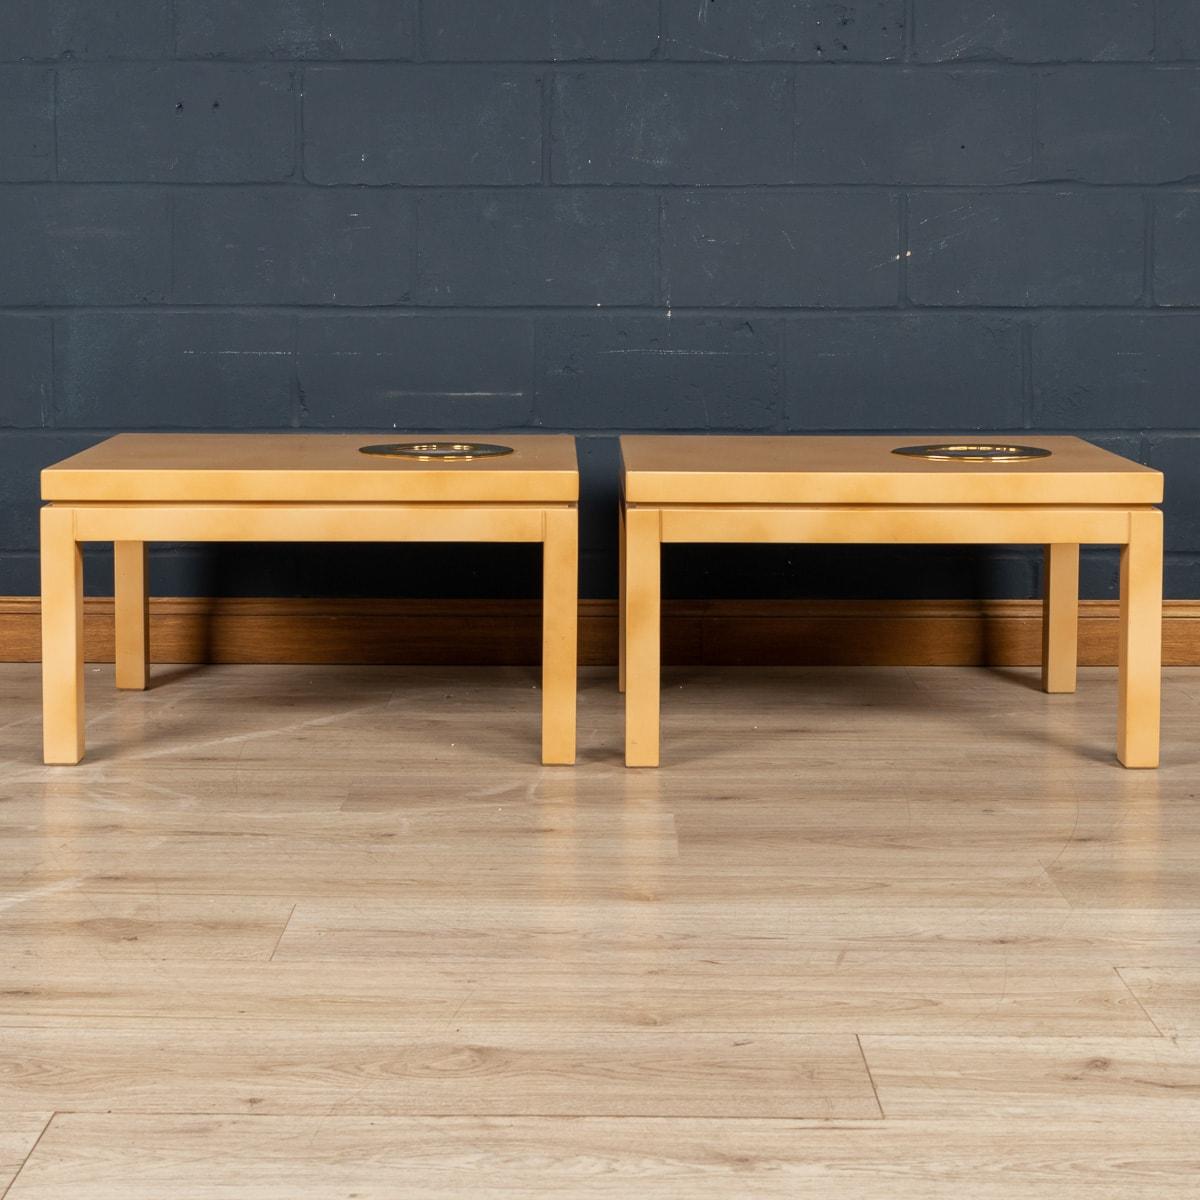 A Pair Of Belgian Lacquered Wood & Agate Side Tables By Willy Daro, c.1970 For Sale 4